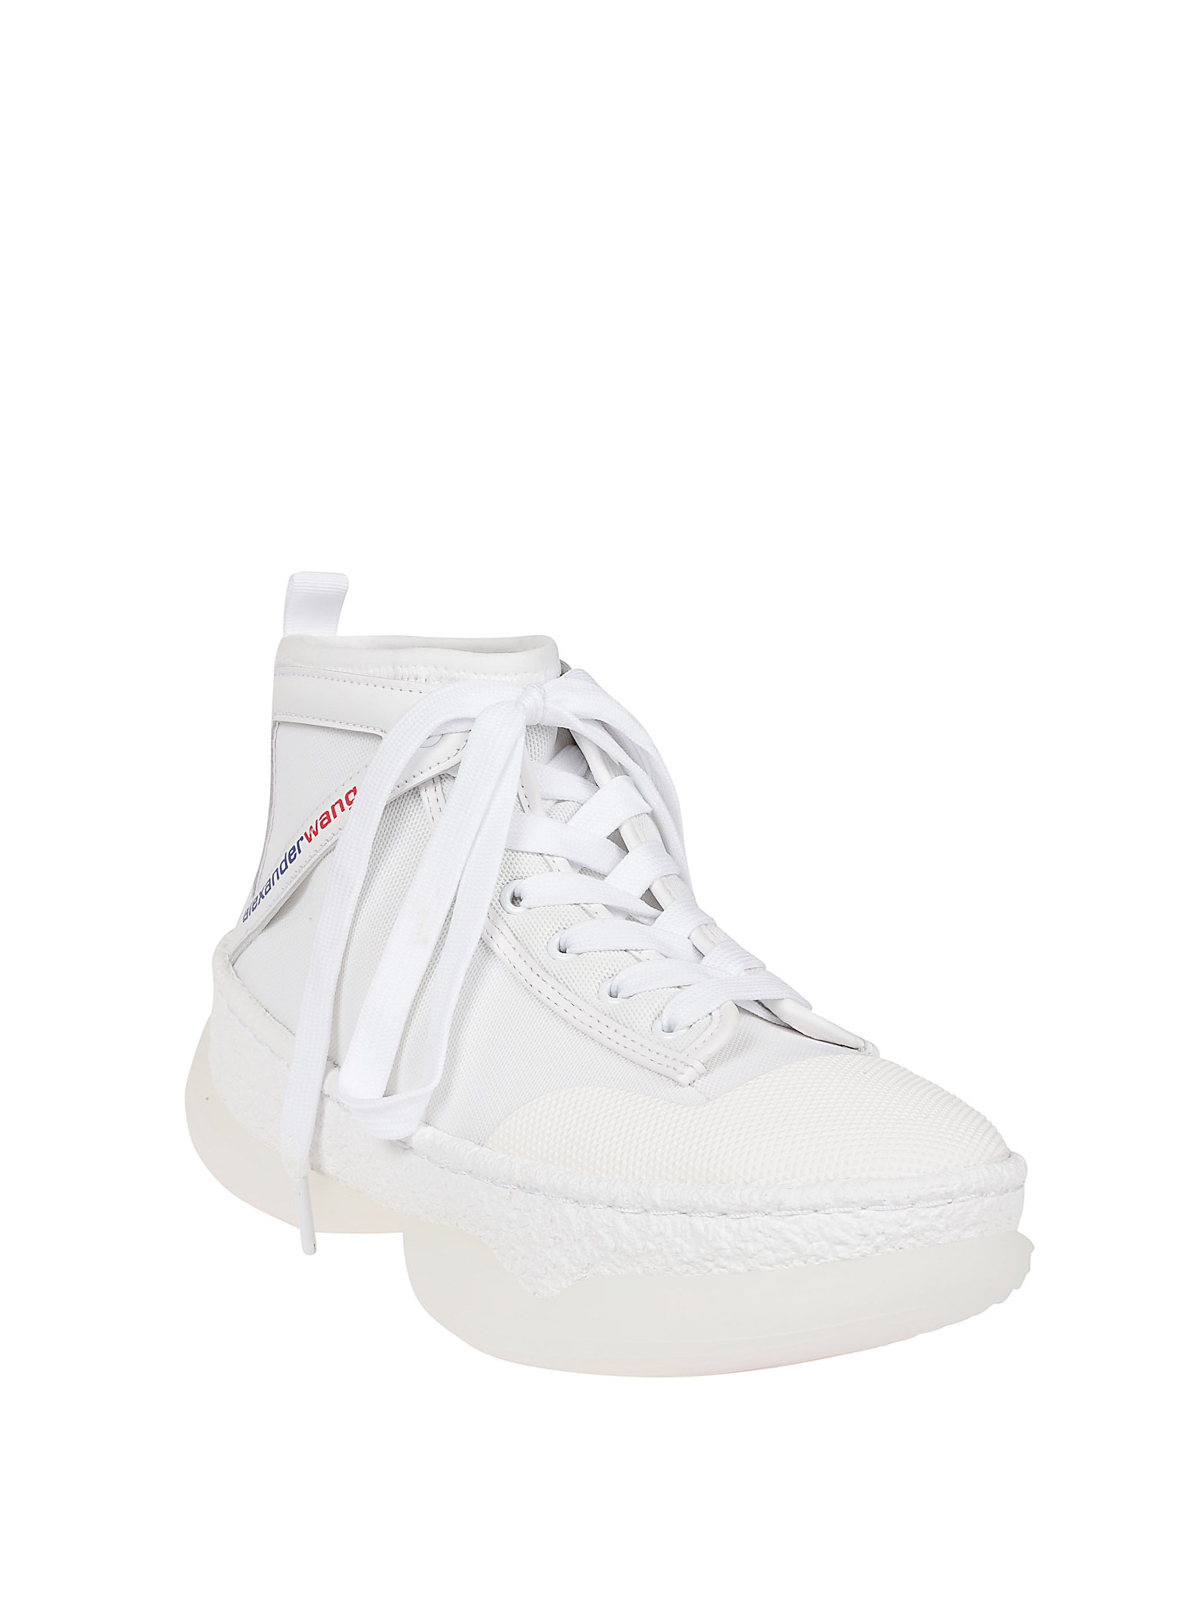 Alexander Wang - a1 white leather and 